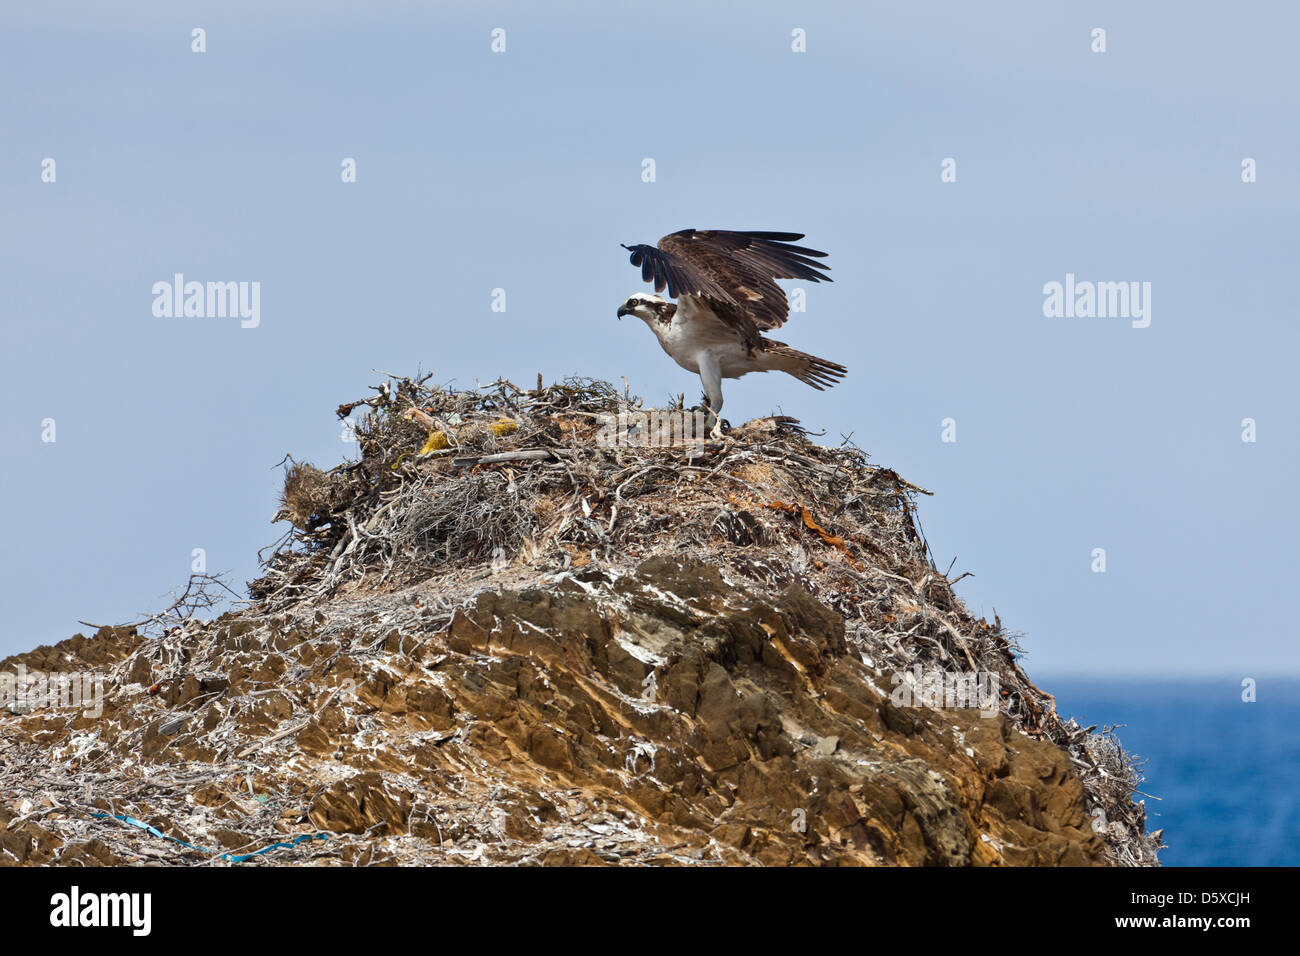 An Osprey, Pandion haliaetus, lands on its nest stacked high on a beach on Isla San Benito Oueste, off Baja California, Mexico. Stock Photo